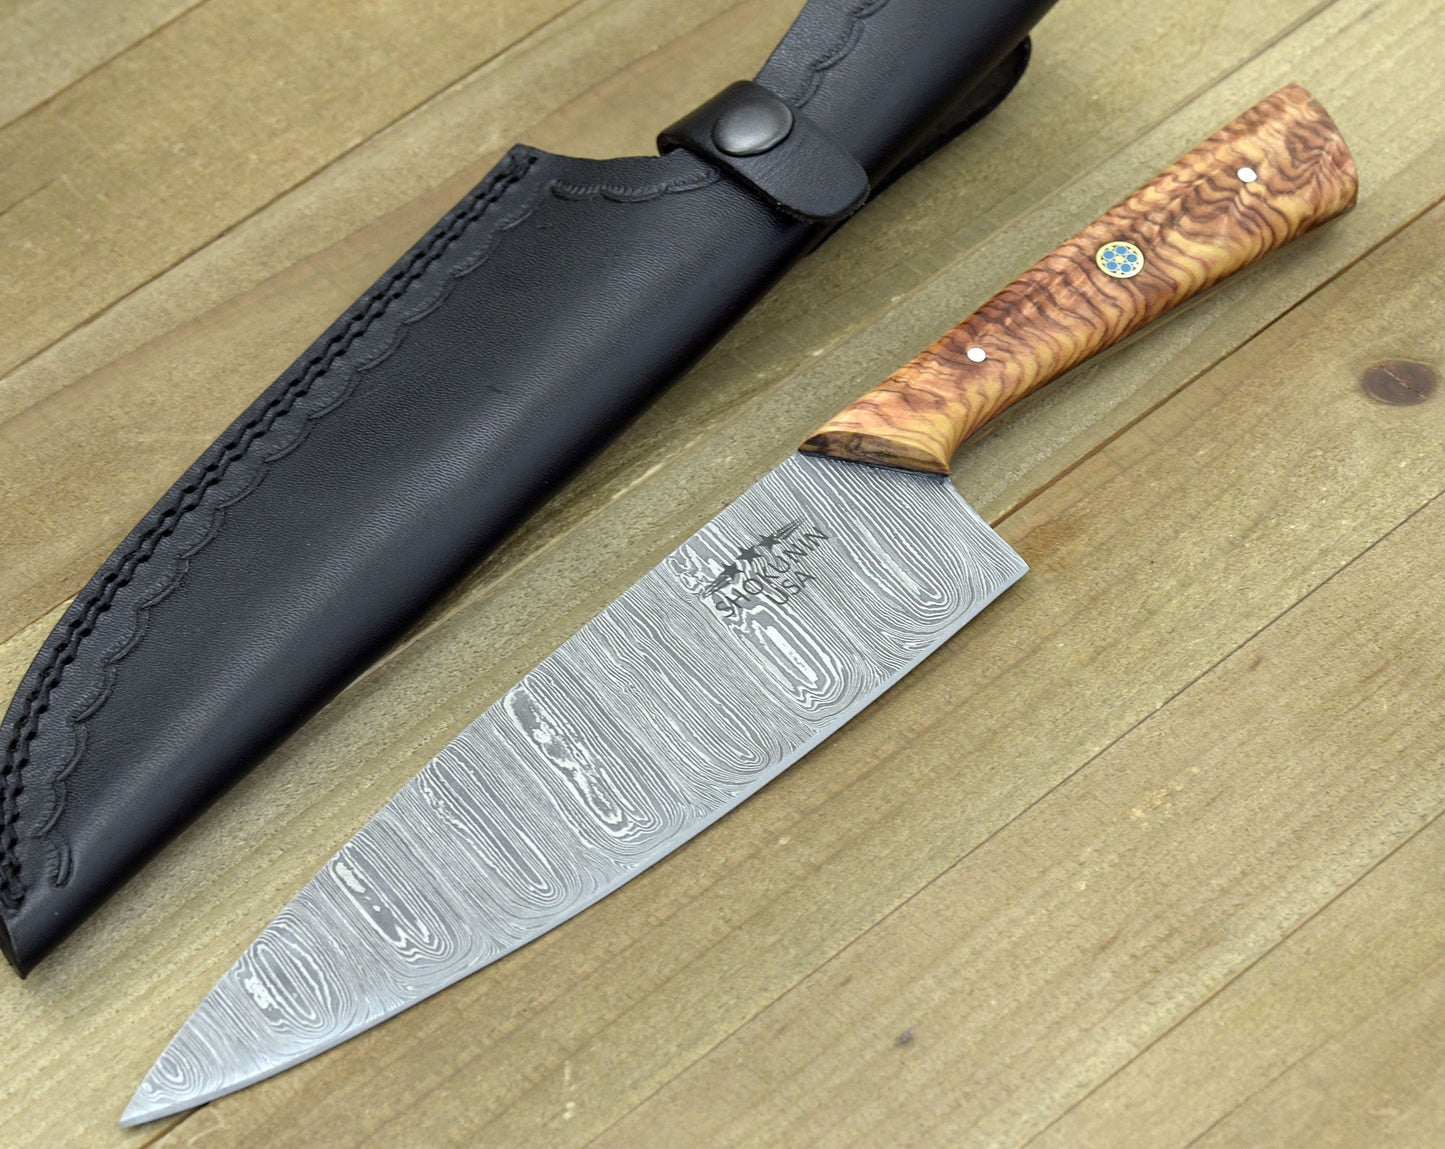 Shokunin USA Perfecta X Pro Chef's Knife, 12" - The Ultimate Kitchen Essential - Groove Rabbit